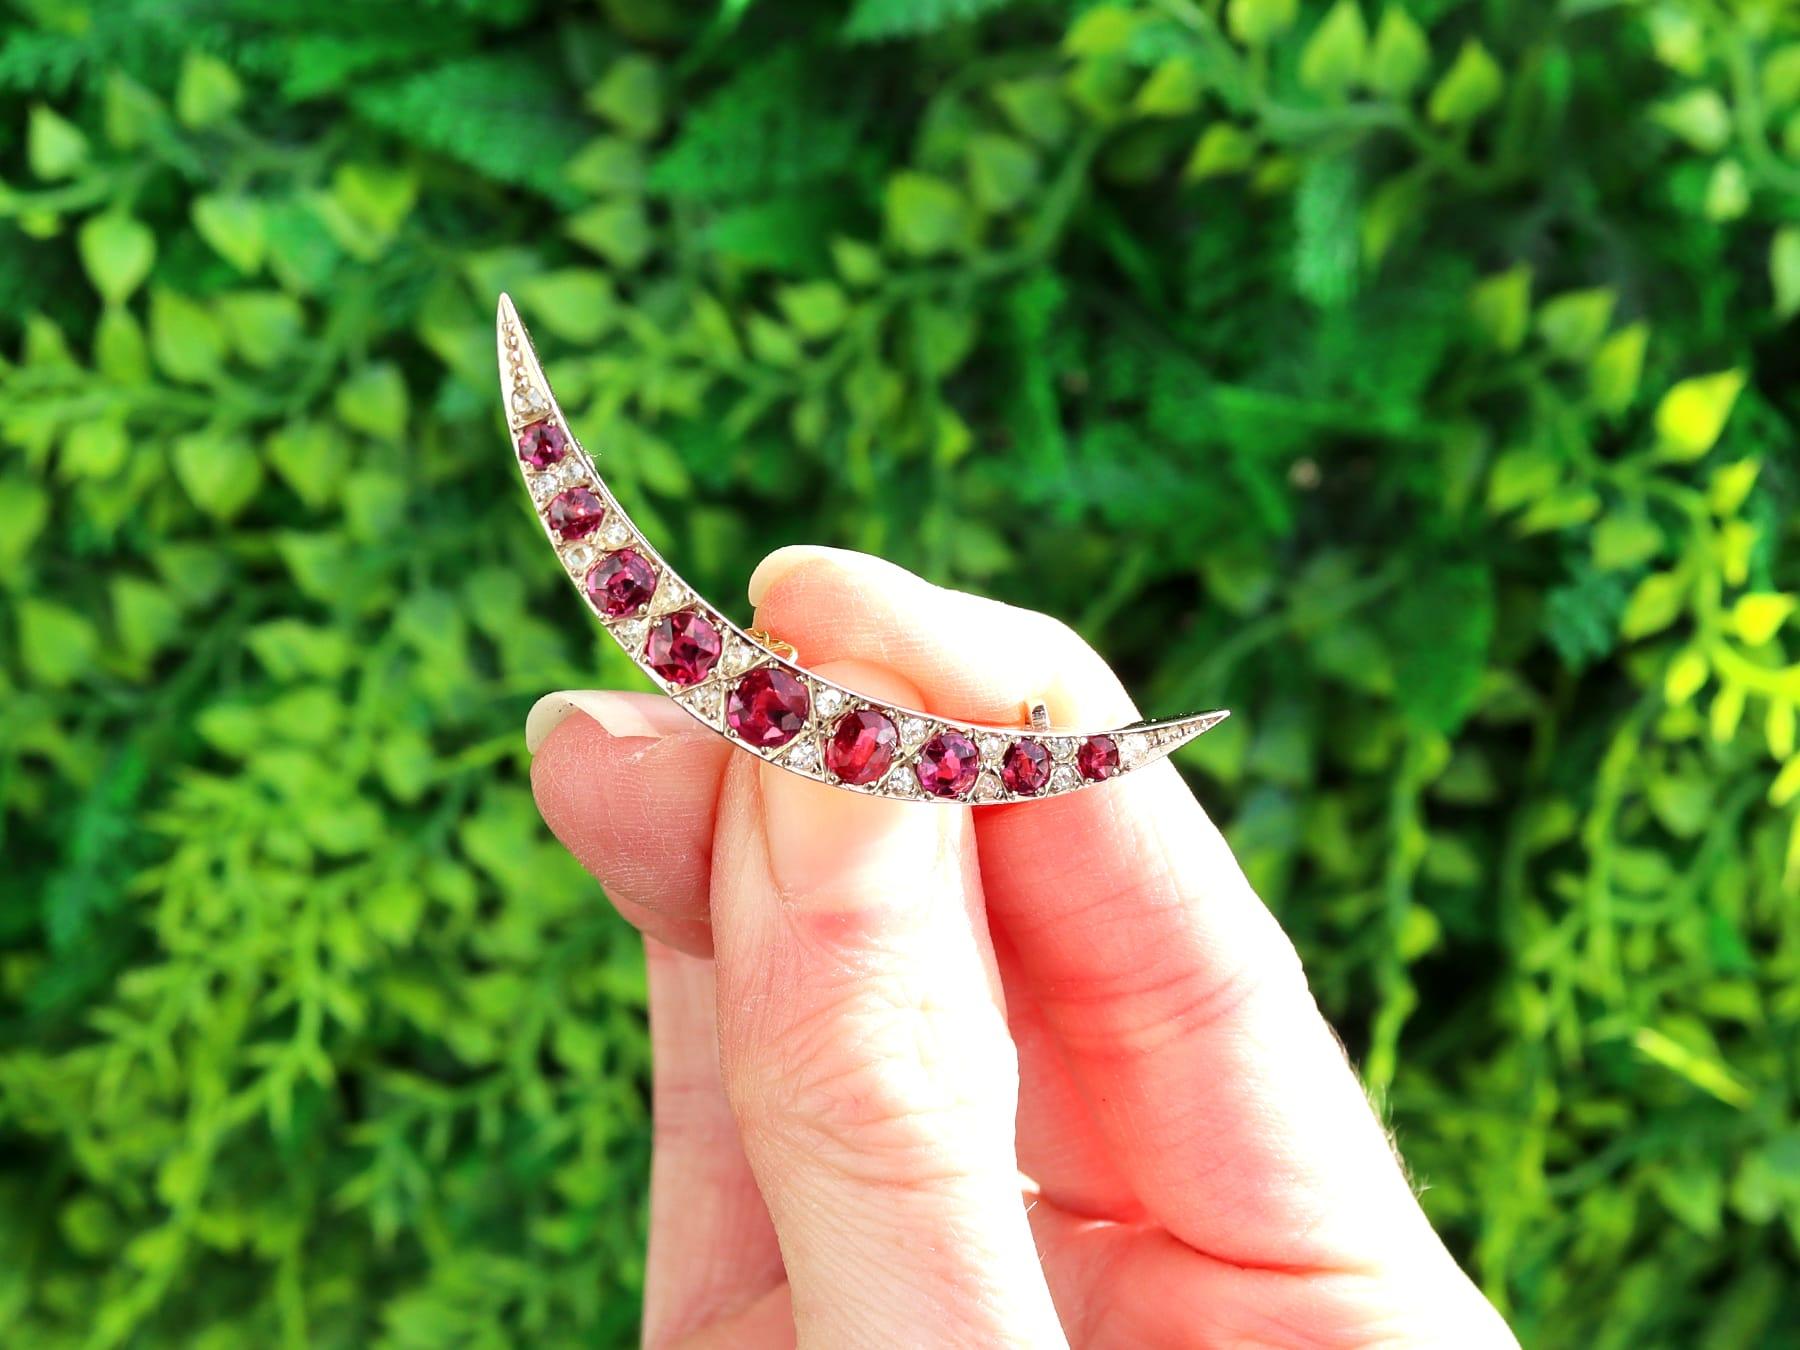 A stunning, fine and impressive 3.95 carat ruby and 0.44 carat diamond and 8 karat yellow gold crescent shaped brooch; part of our diverse Victorian ruby jewellery collections.

This stunning, fine and impressive antique Victorian brooch has been